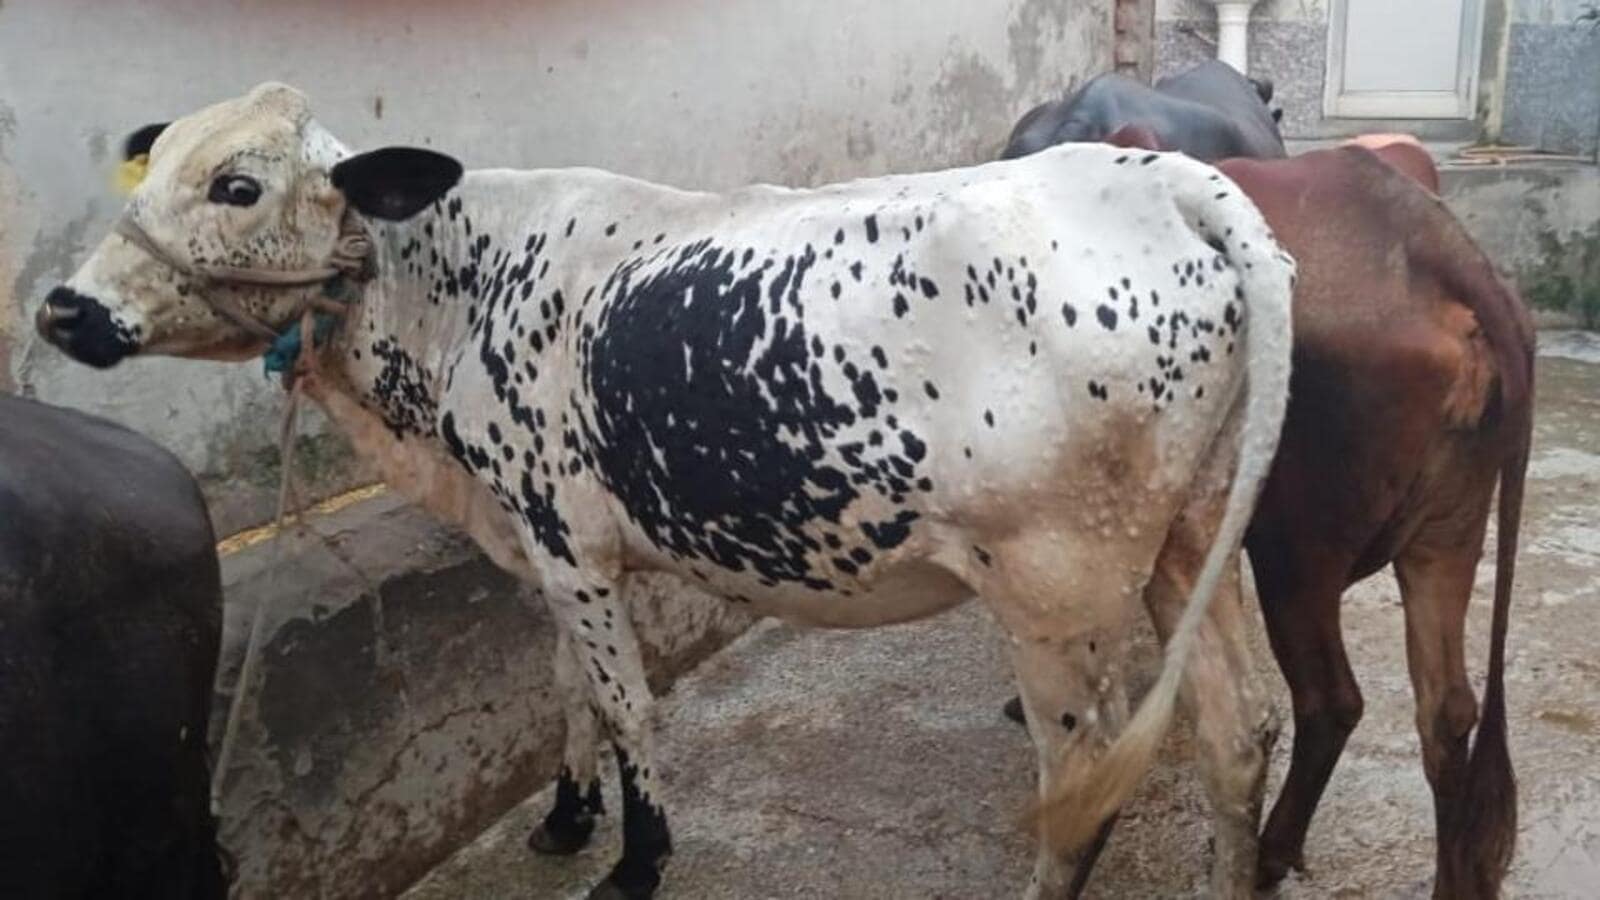 Haryana herders at wits' end as bovines come down with lumpy skin disease -  Hindustan Times